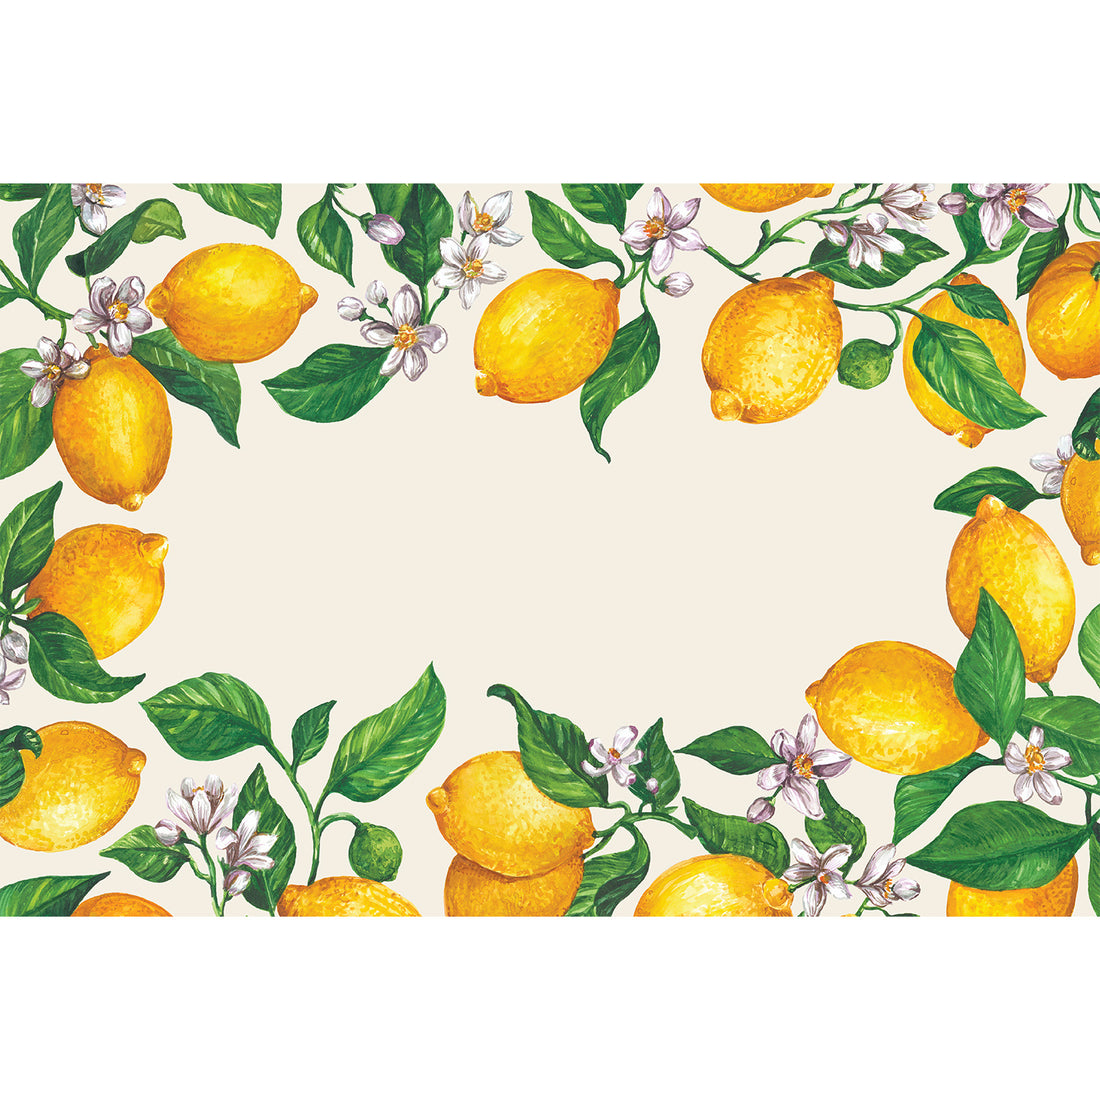 An illustrated wreath of vibrant yellow lemons with green leaves and white blossoms, with a blank white area in the center for a personal message.